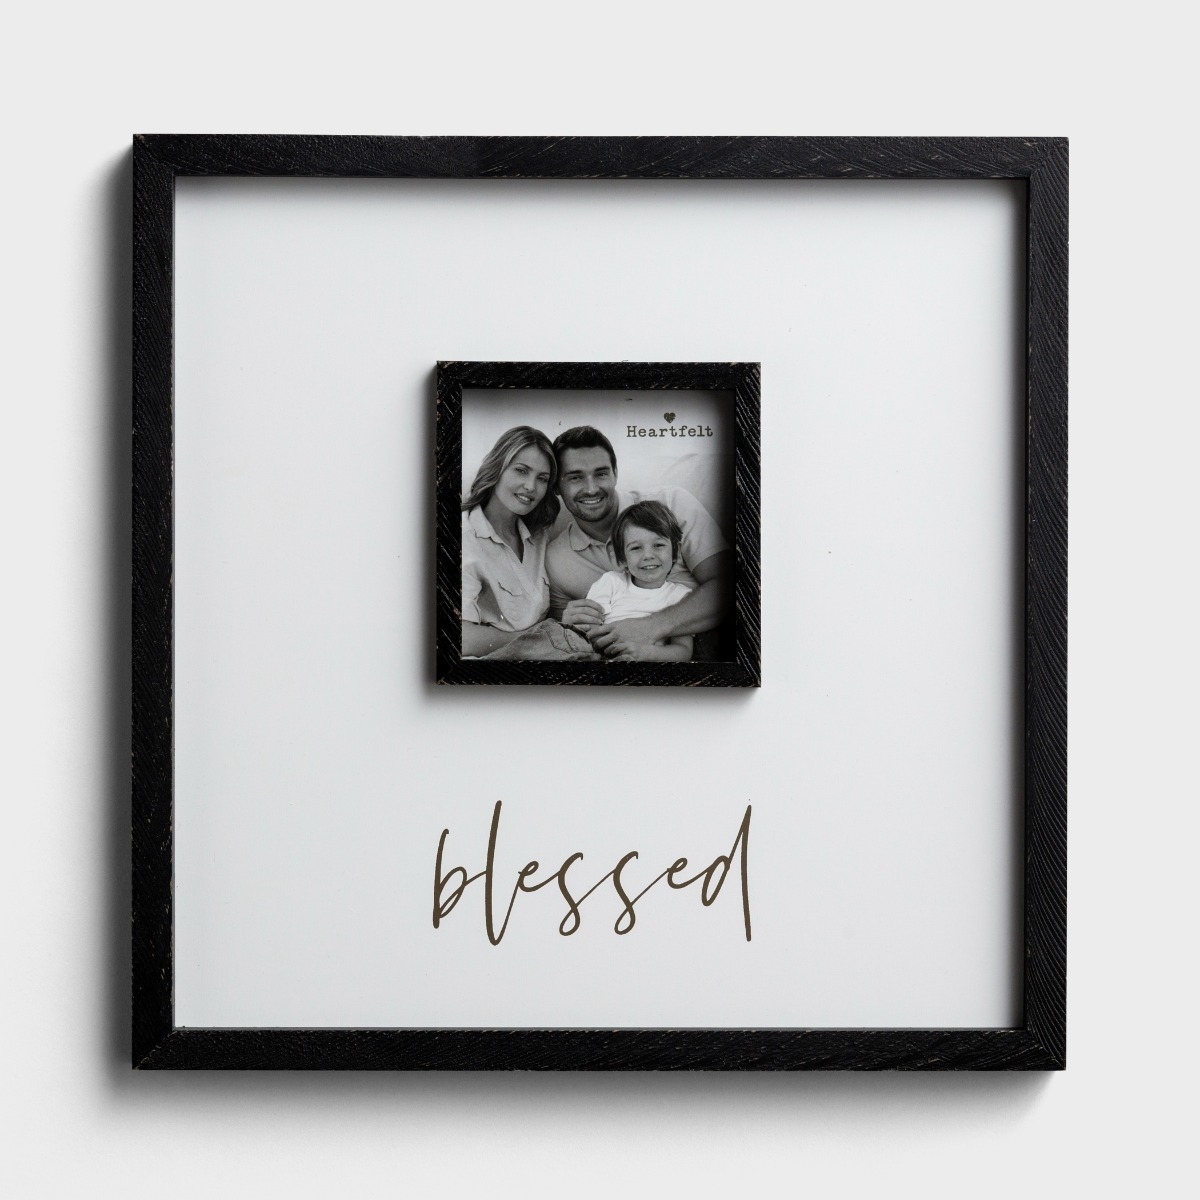 Blessed - Picture Frame, Holds 4"x4" Photo